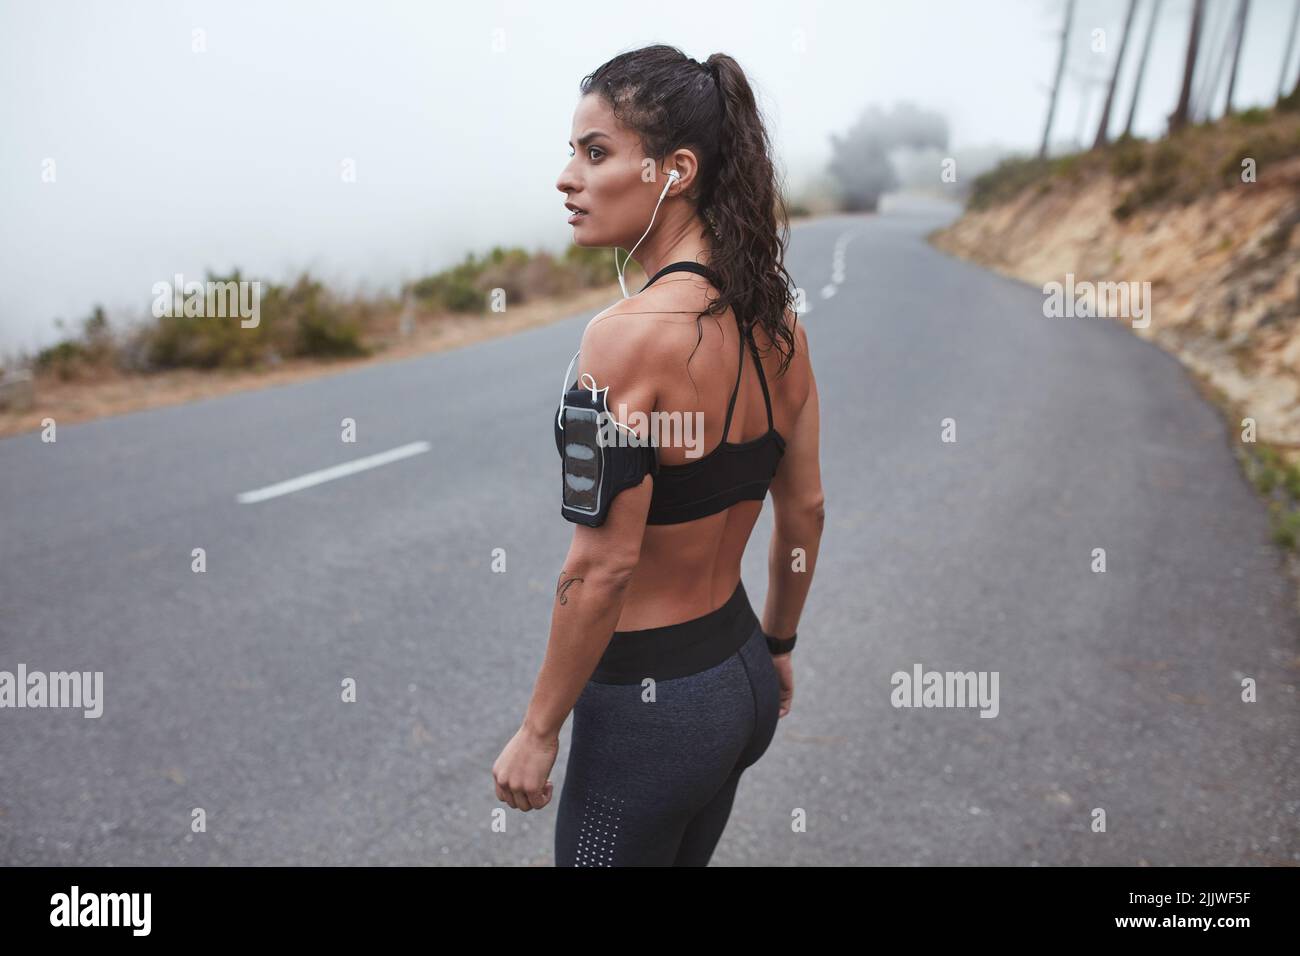 Fit young woman going out for a morning run along a misty road. Sporty young woman listening to music during her training session. Stock Photo